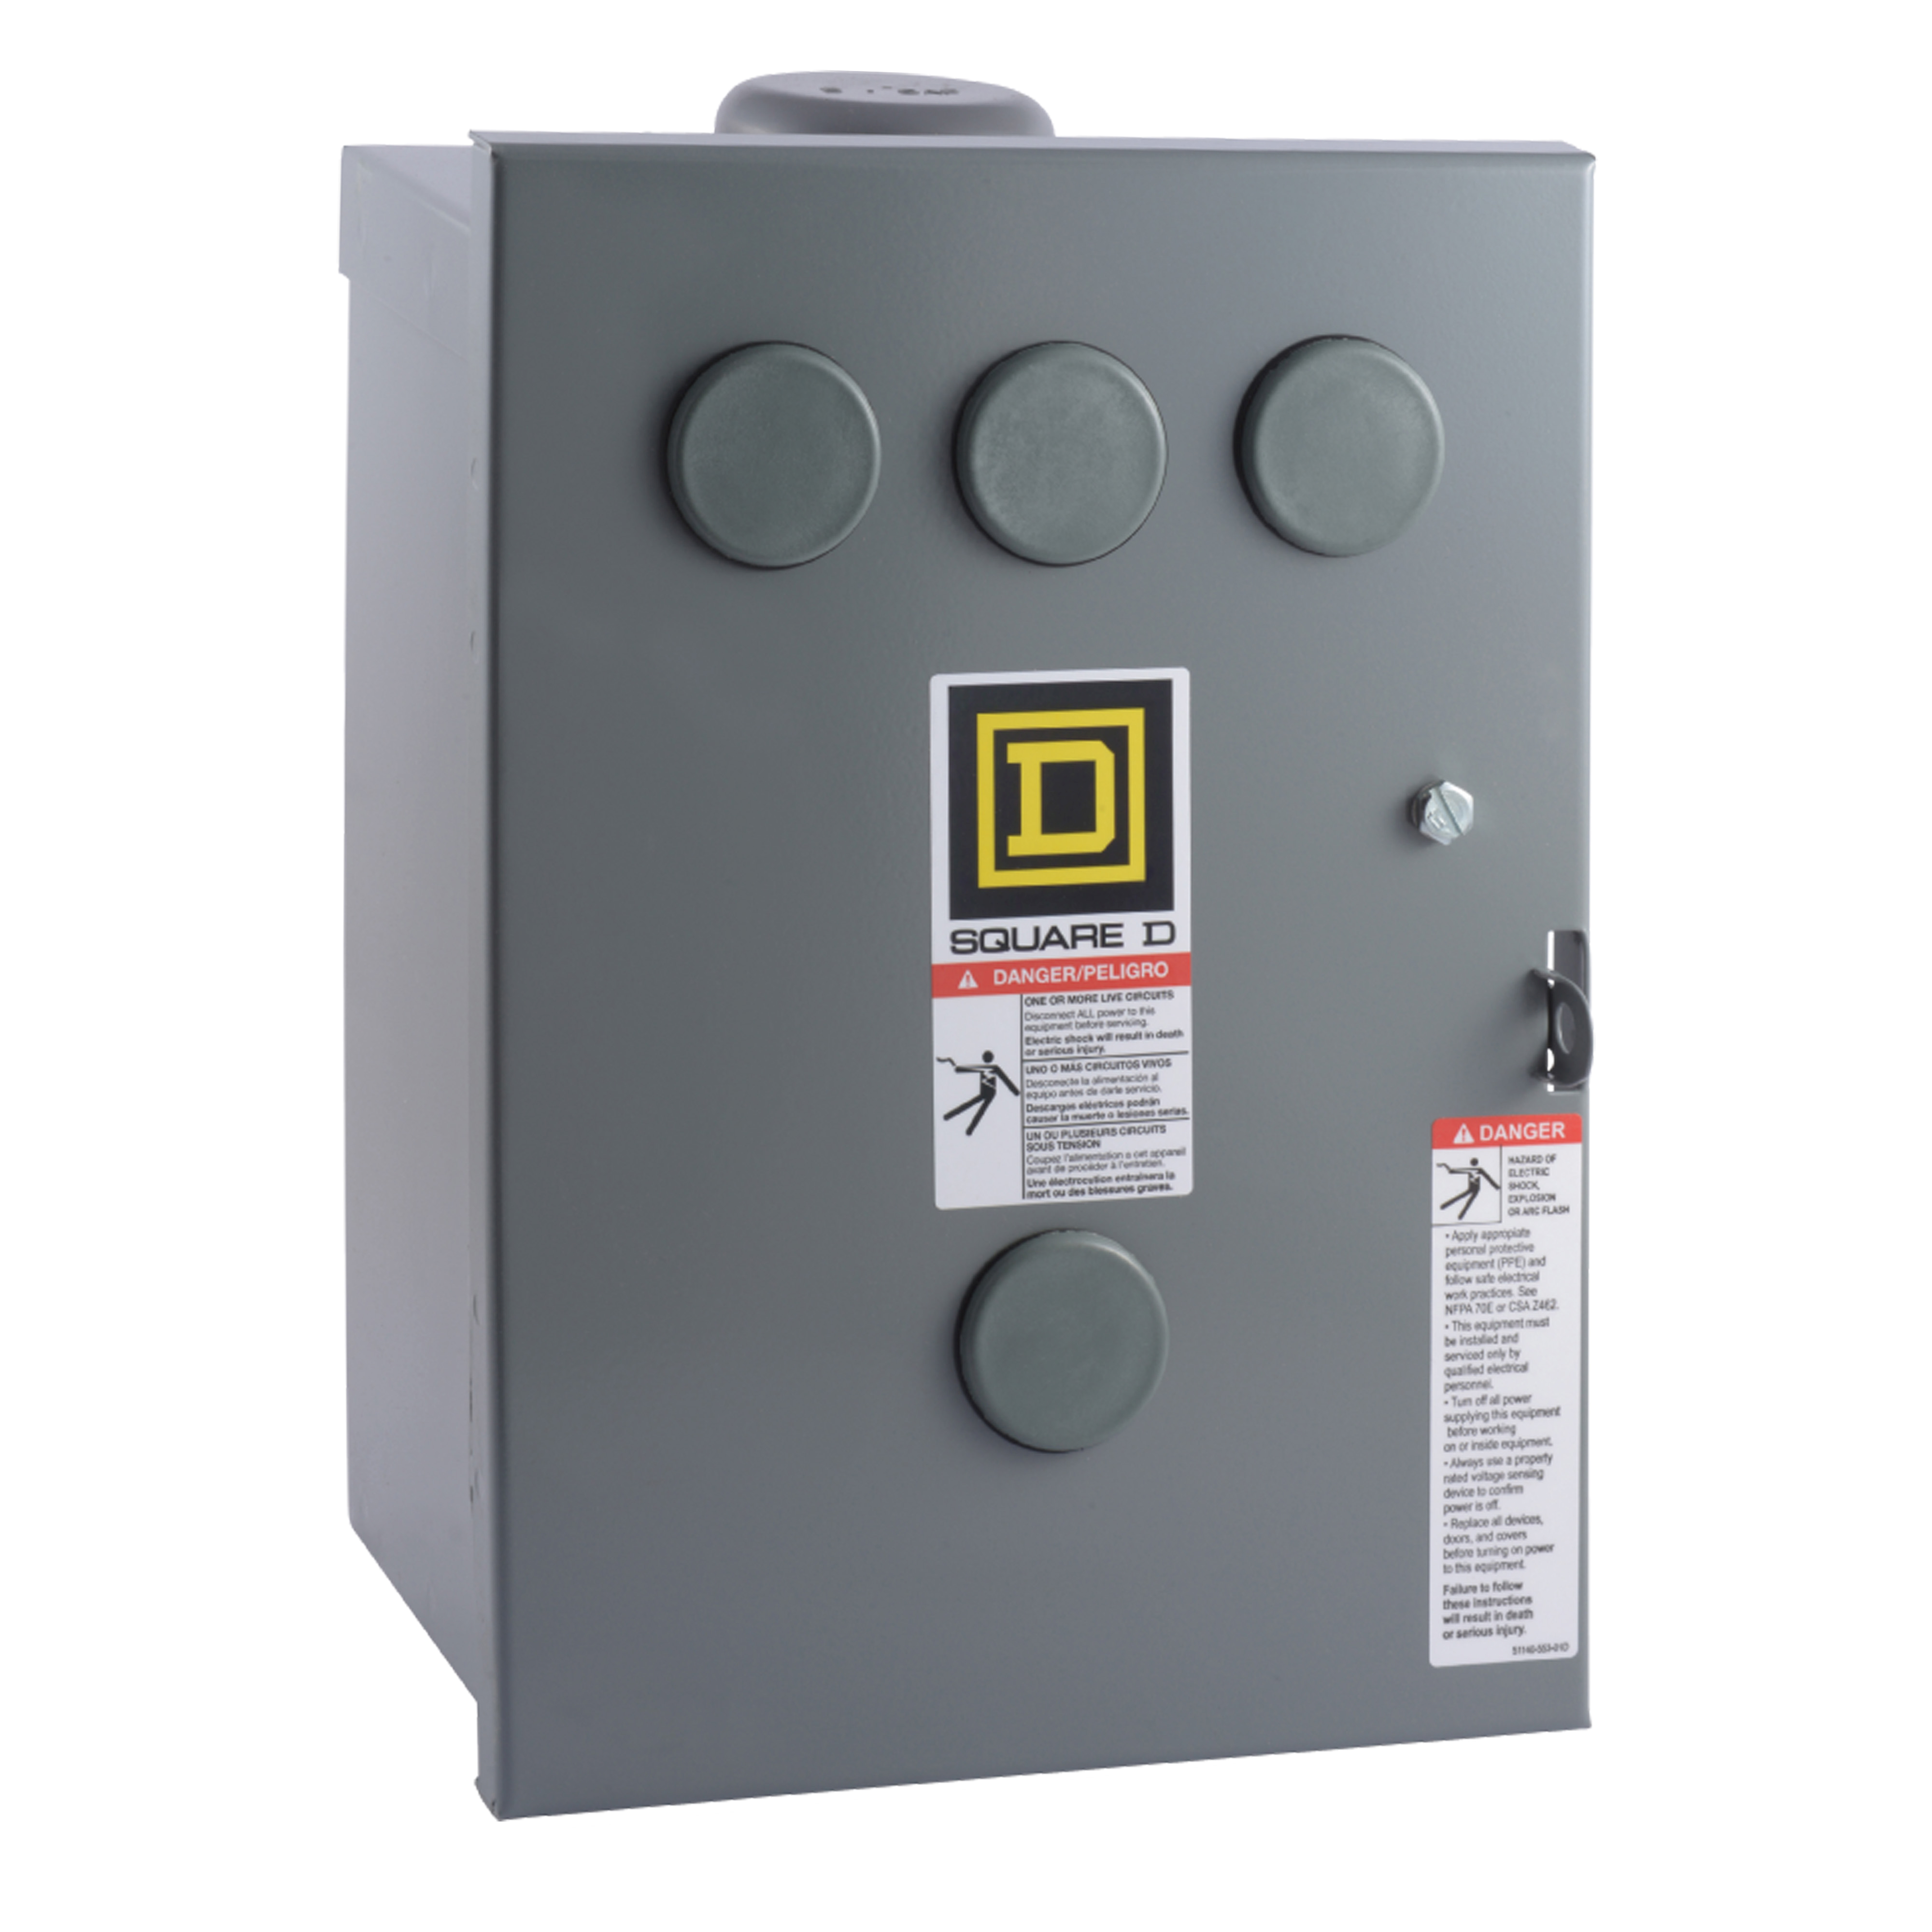 Contactor, Type S, multipole lighting, electrically held, 30A, 3 pole, 220/240 VAC 50/60 Hz coil, NEMA 3R